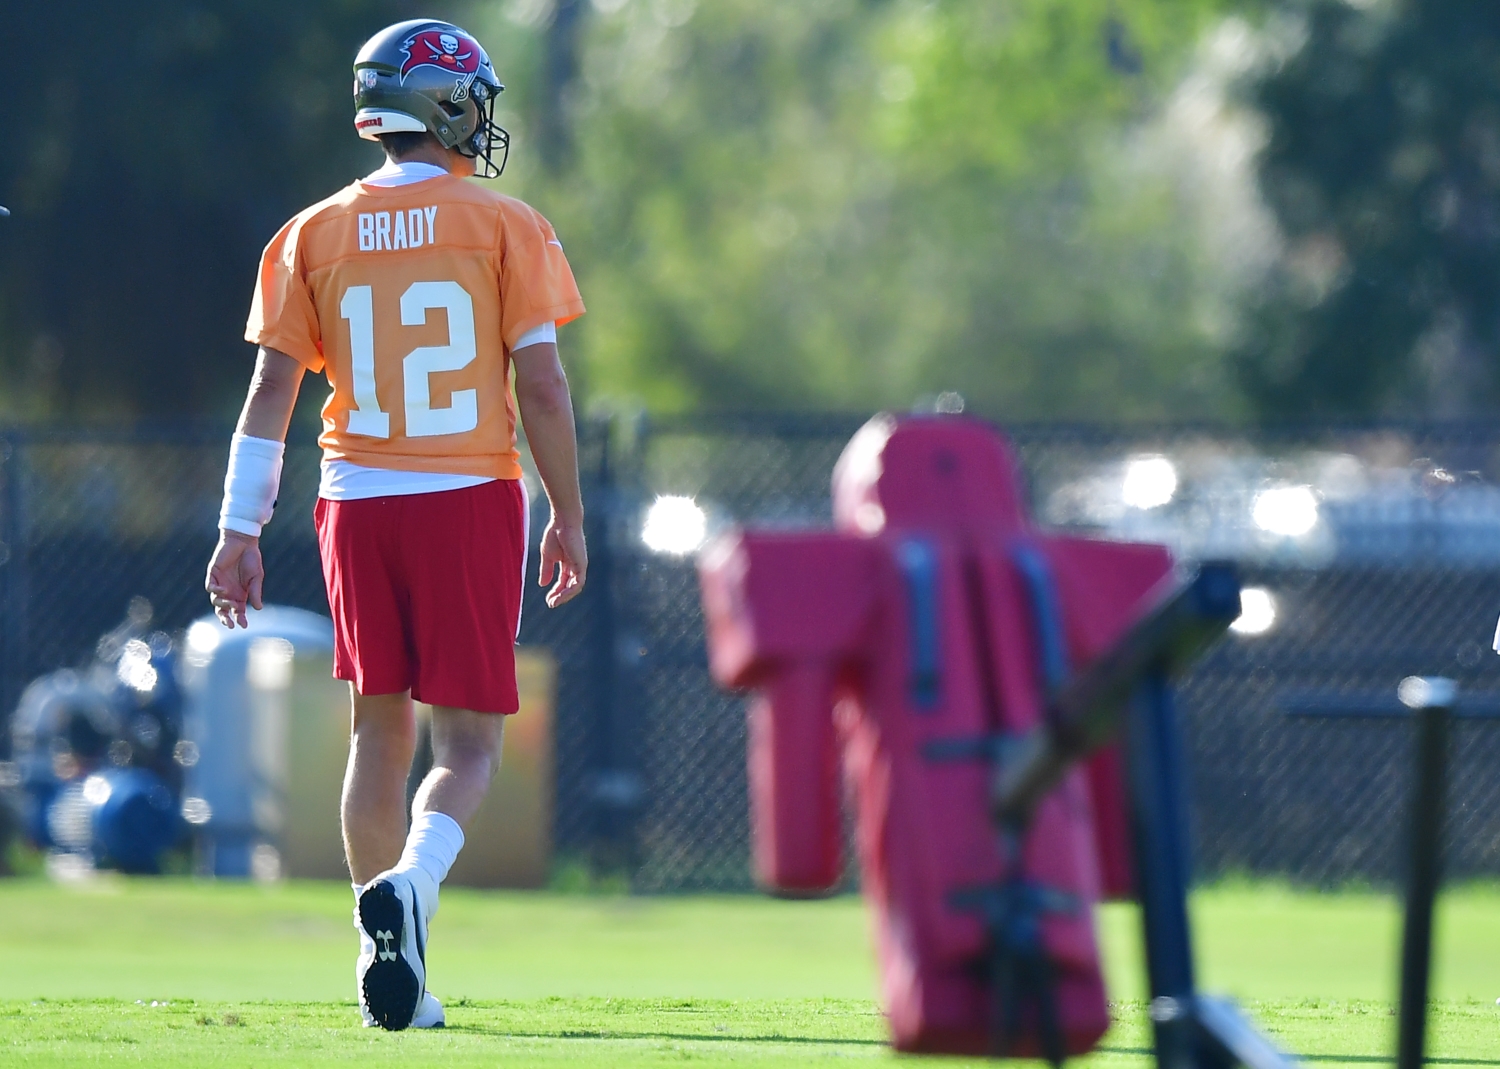 Tom Brady walks across the field during a training camp practice with the Tampa Bay Buccaneers.